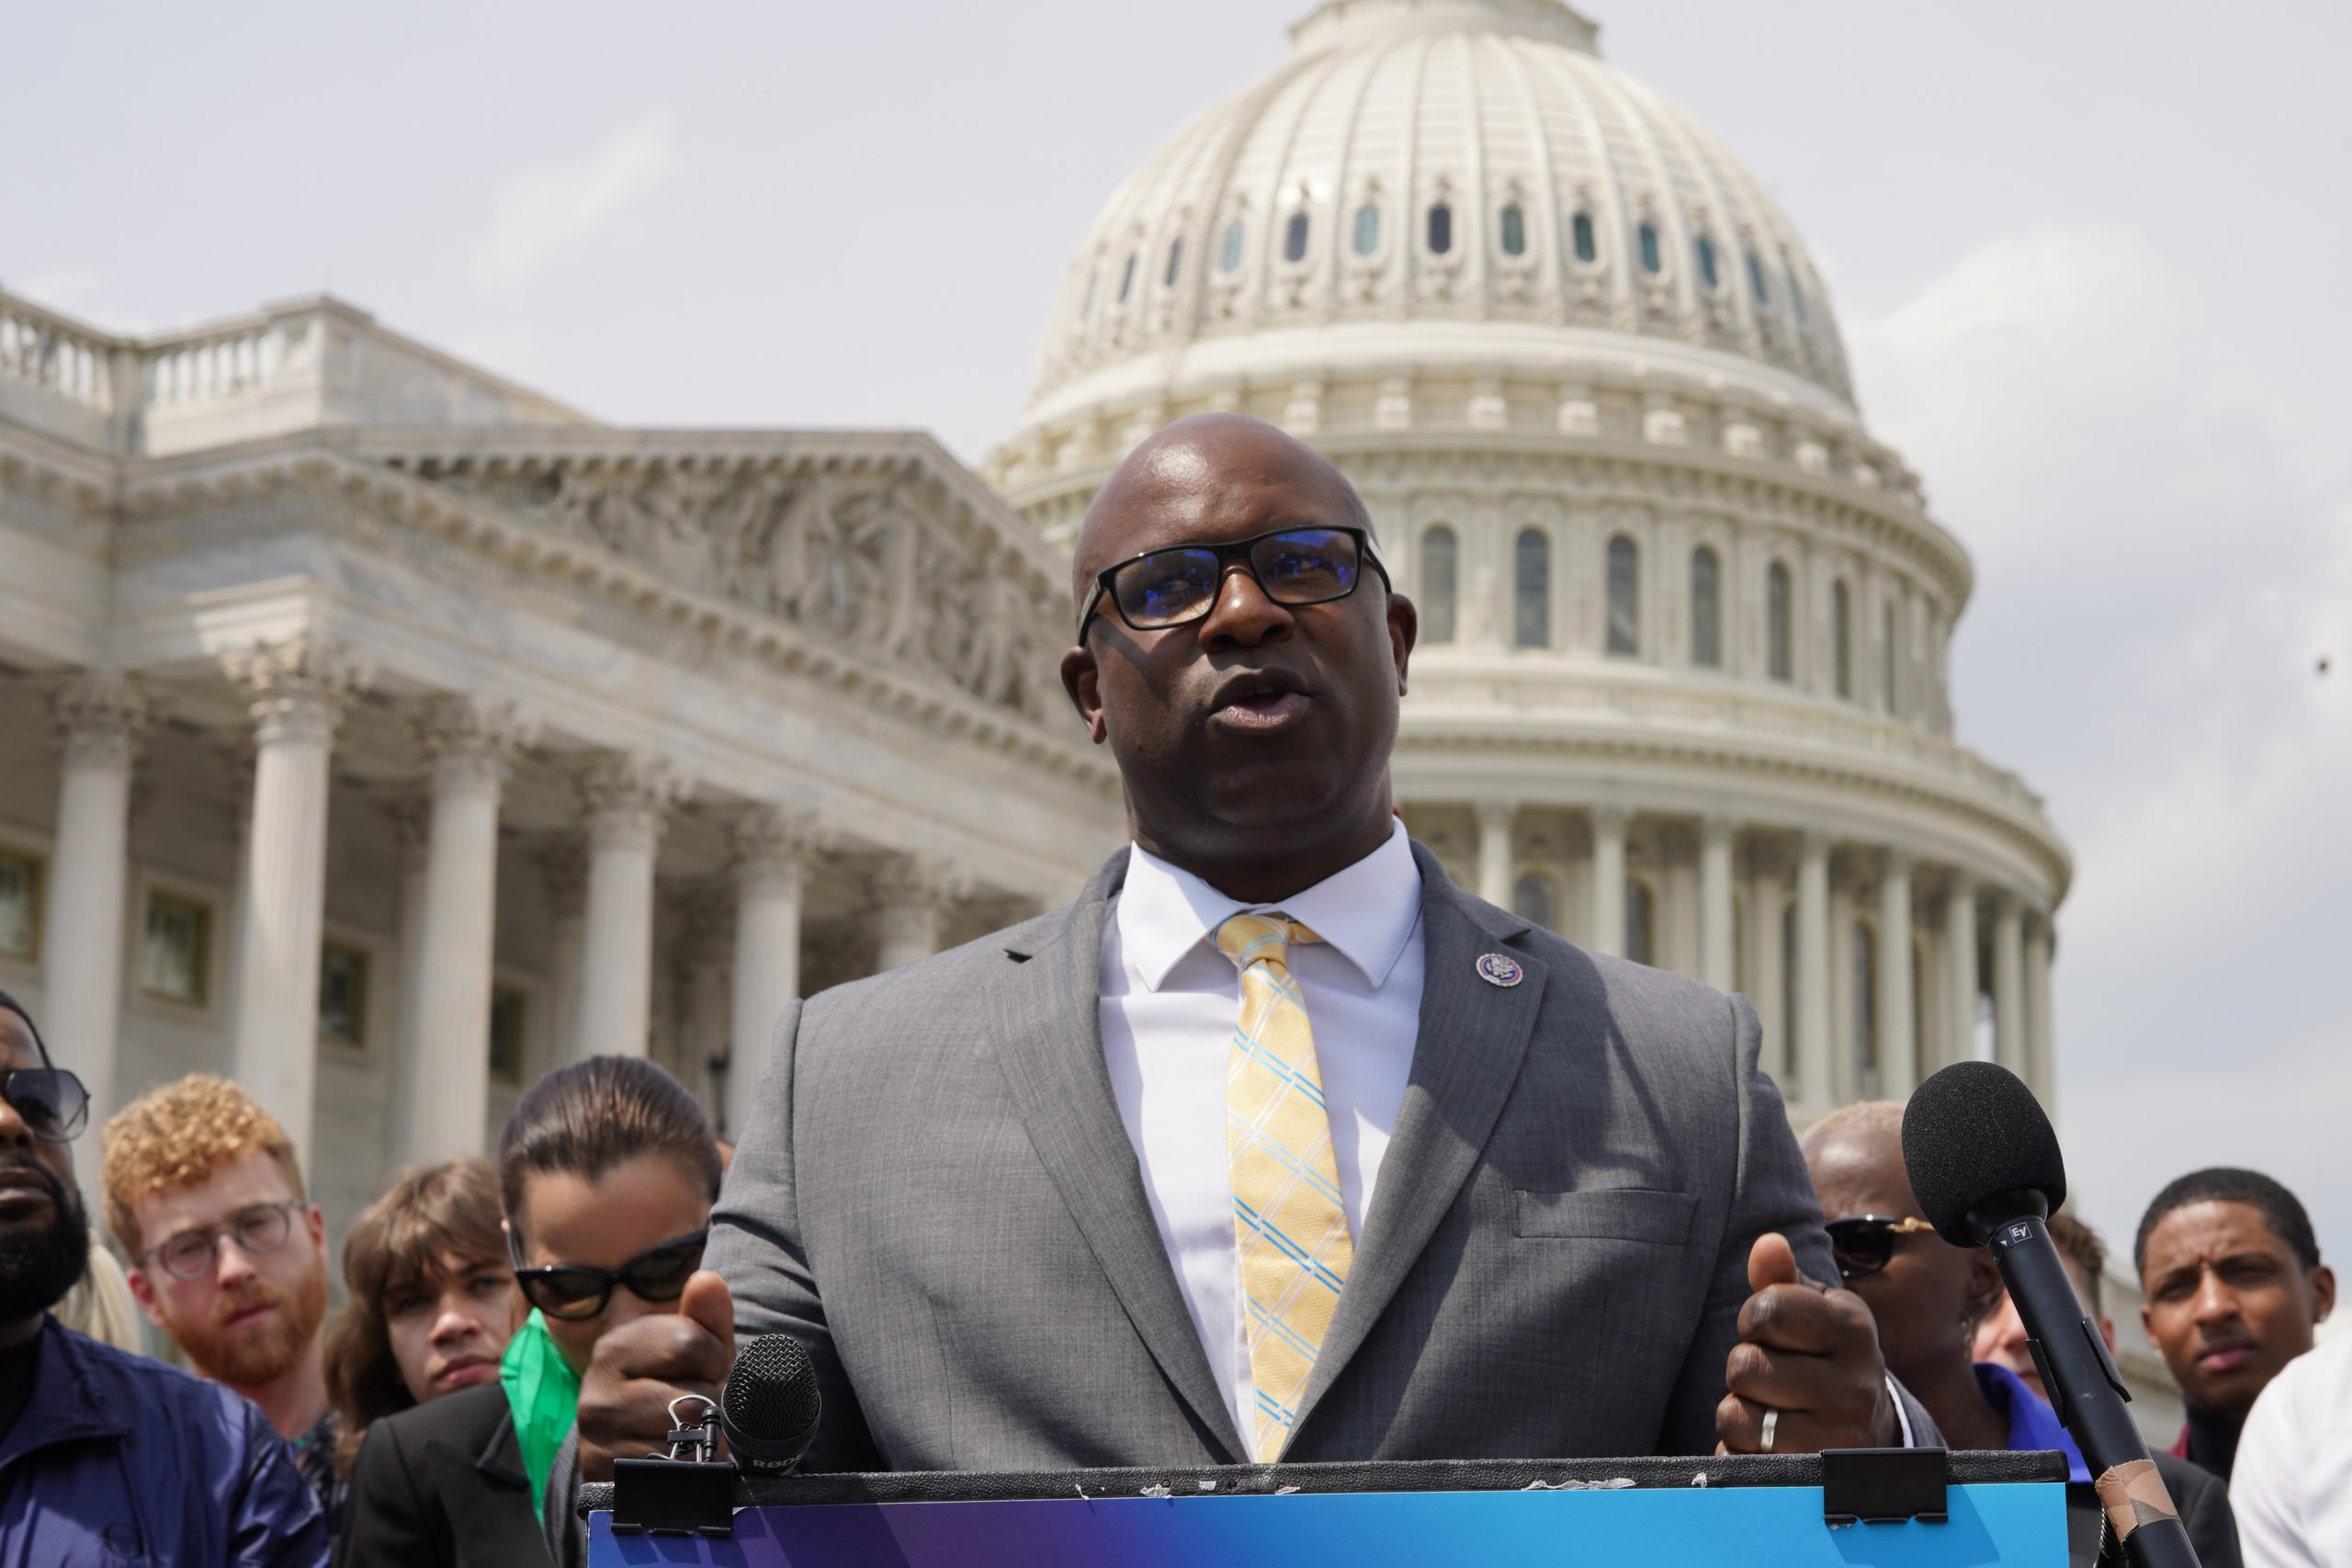 WASHINGTON, DC - APRIL 27: U.S. Representative Jamaal Bowman speaks at Grammys On The Hill: Advocacy Day on April 27, 2023 in Washington, DC. (Photo by Leigh Vogel/Getty Images for The Recording Academy)